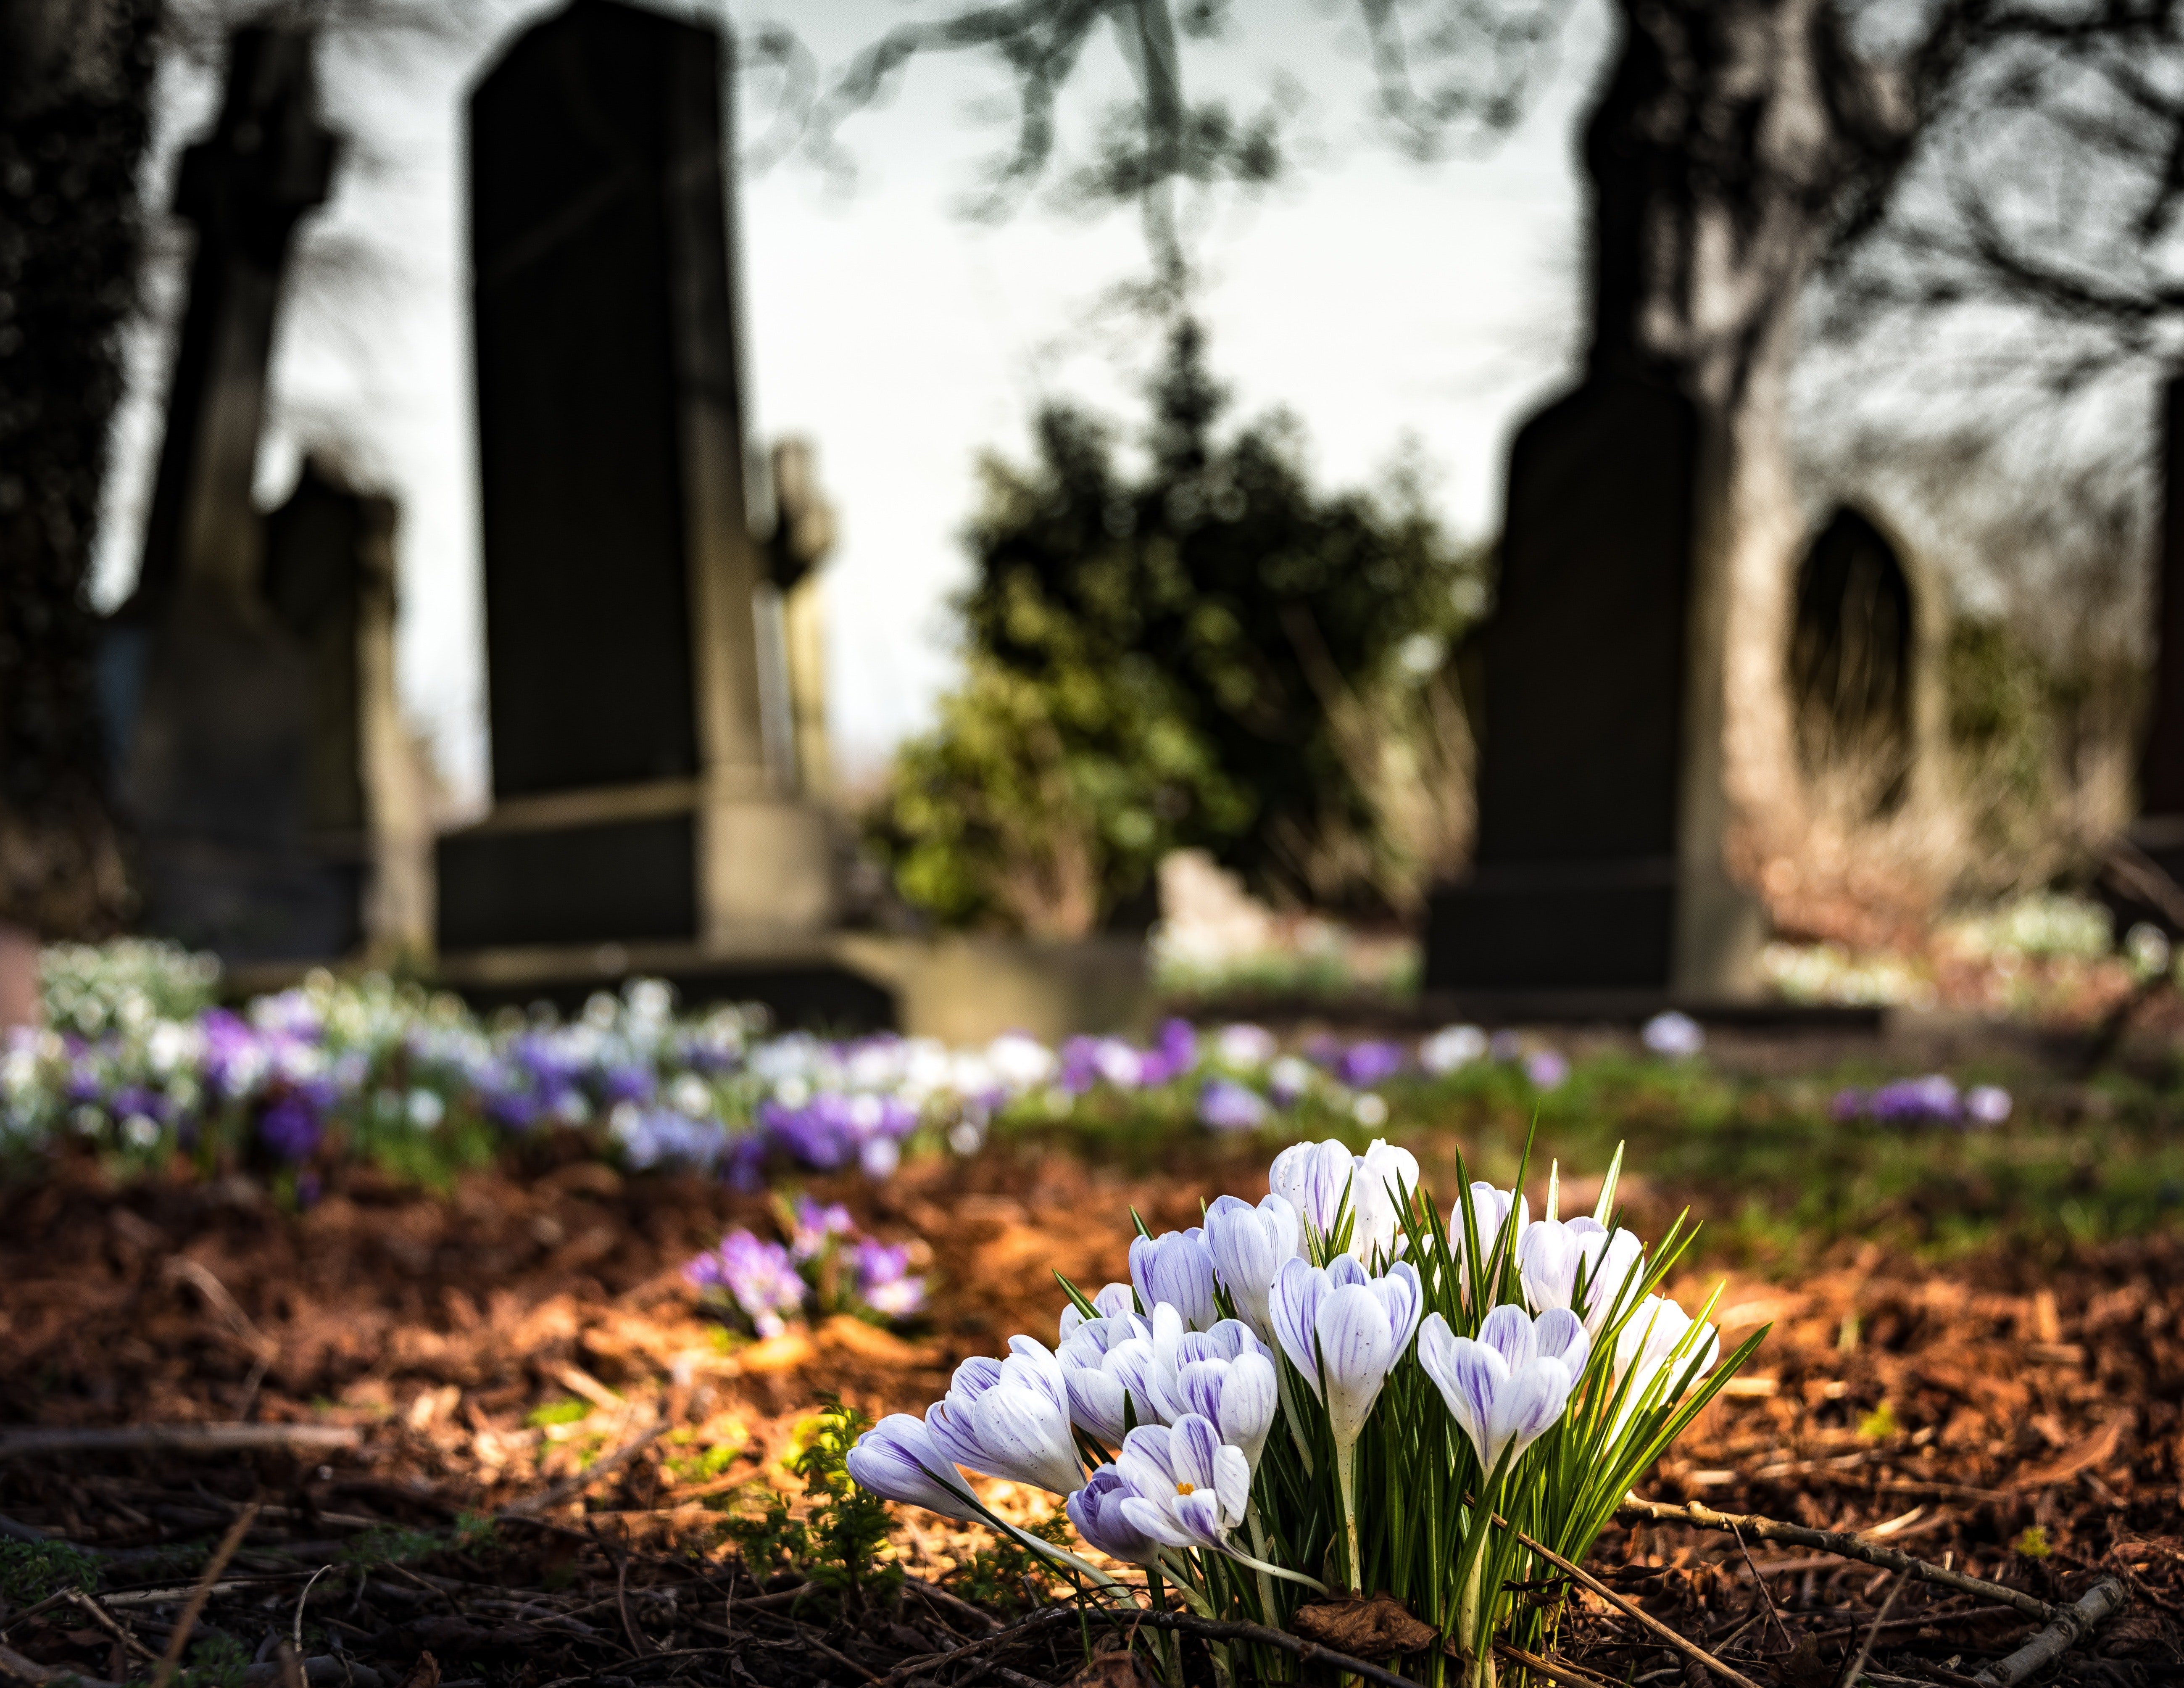 Mike and Stella found Charlotte in the cemetery. | Source: Pexels